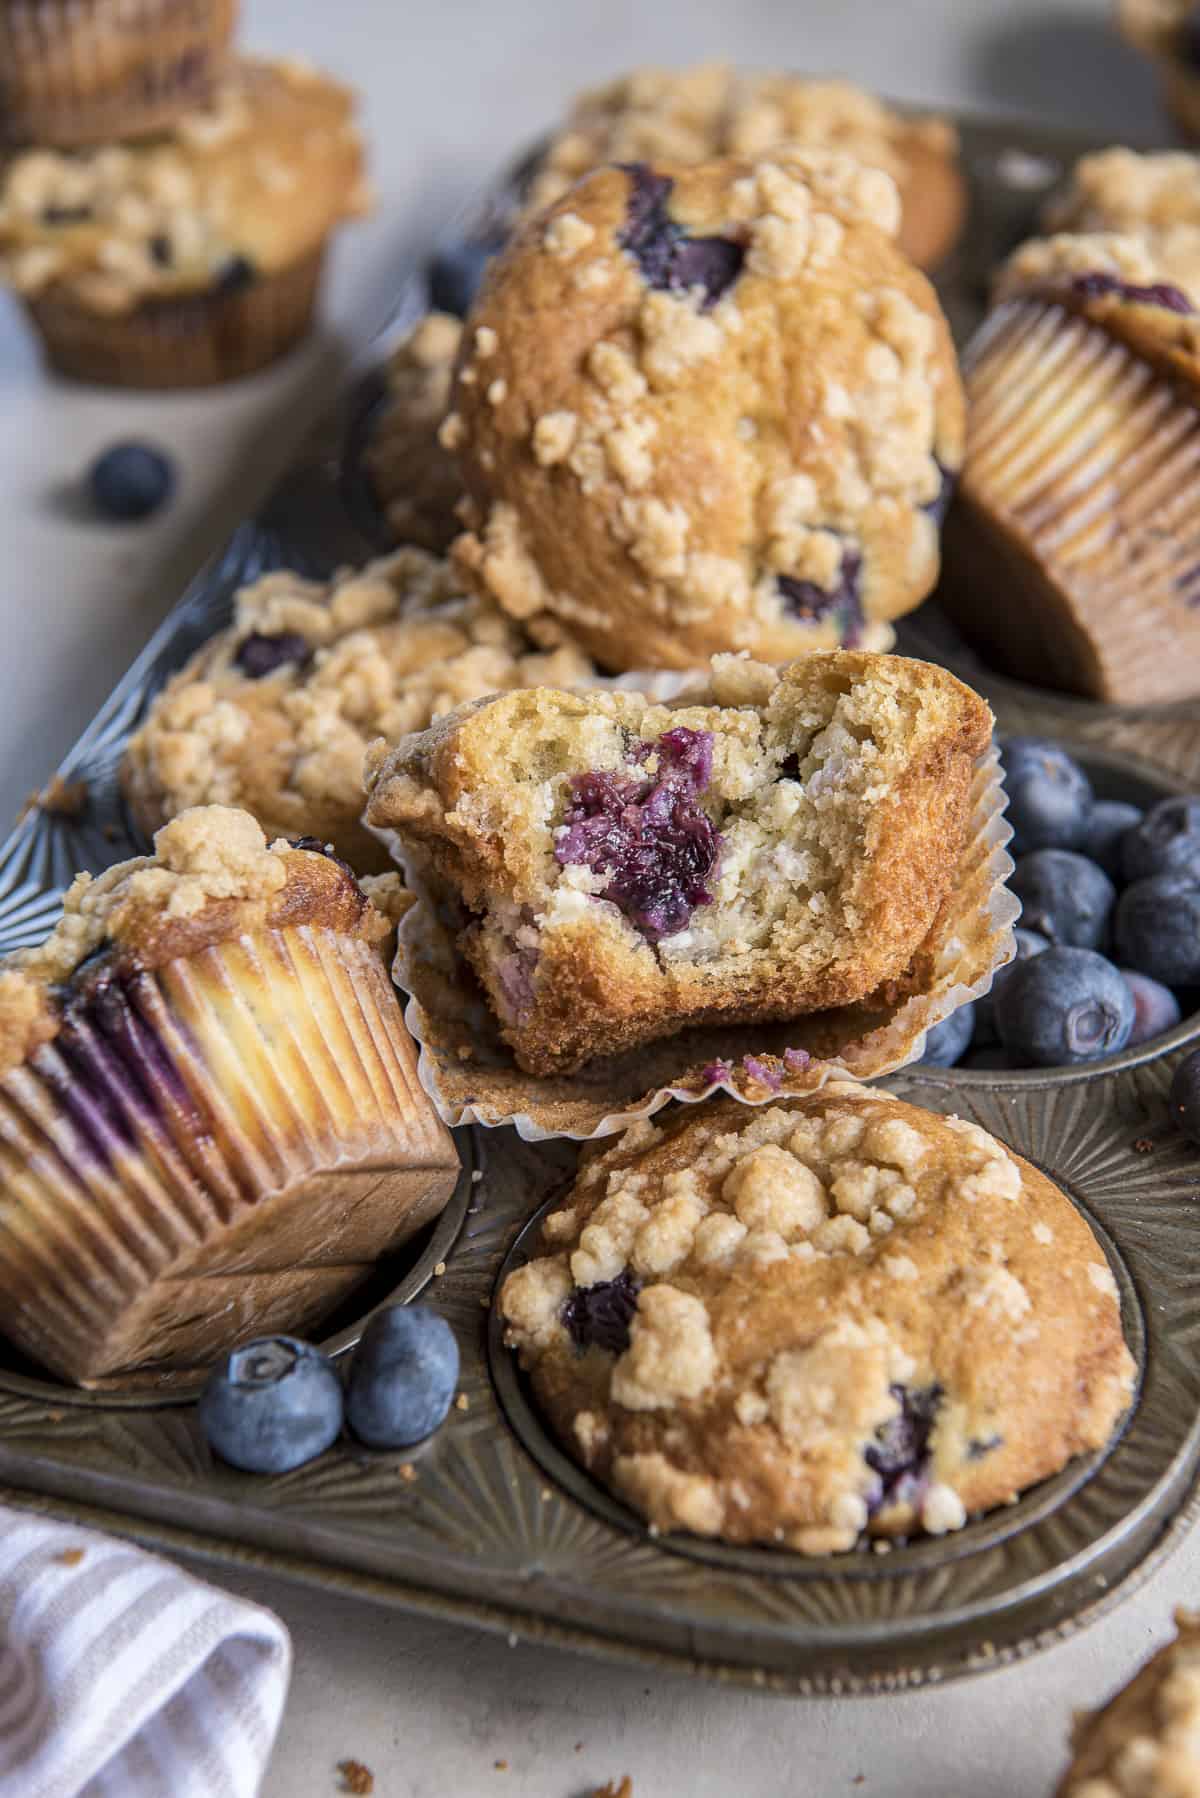 a blueberry cheesecake muffin with a bite taken out of it, nestled among other muffins in a vintage muffin tin with blueberries scattered around